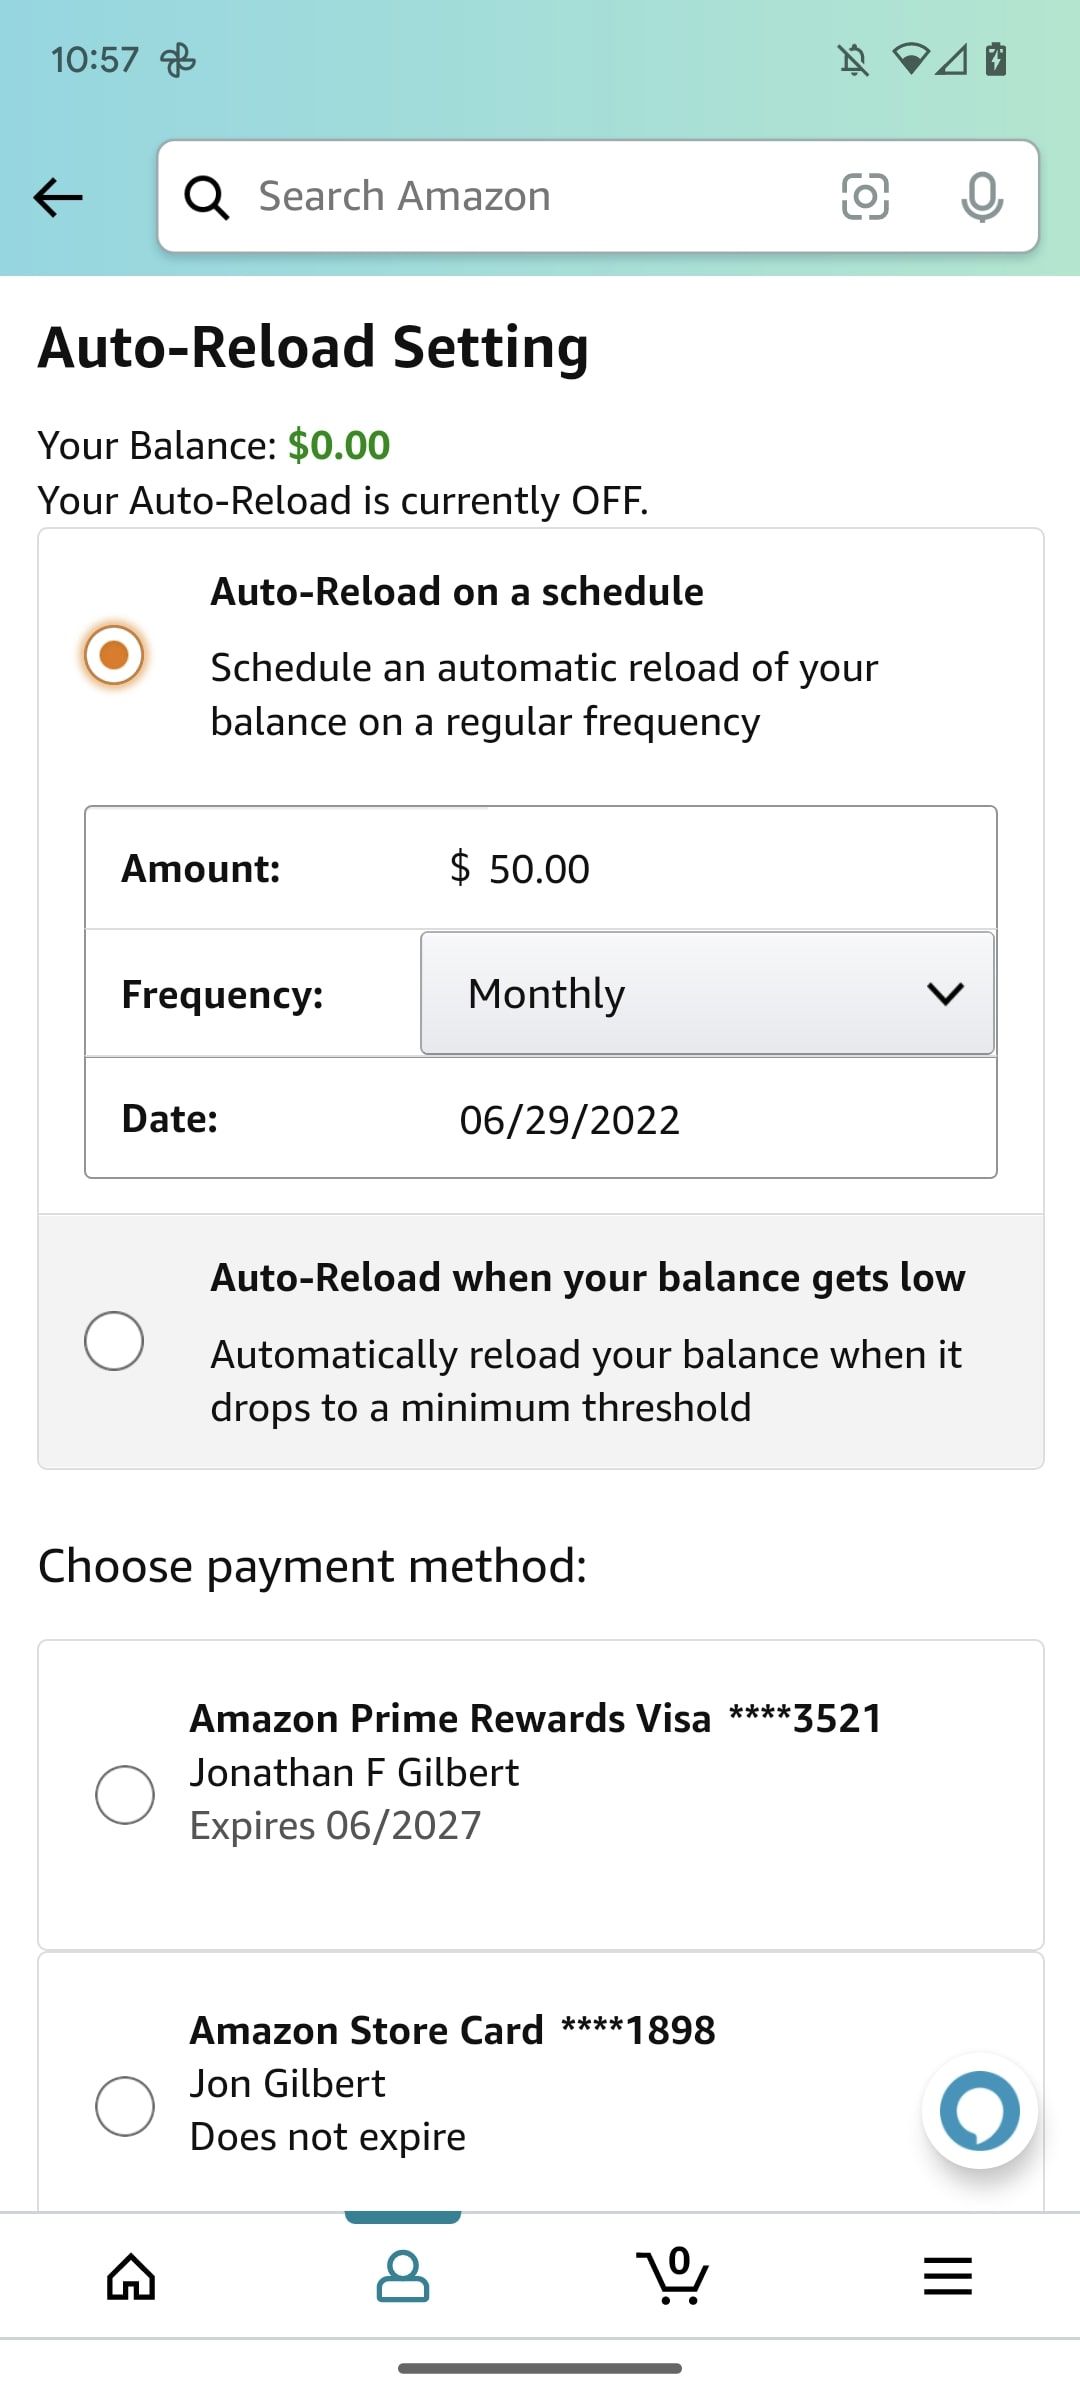 How to Redeem Amazon Gift Card or Claim Code on iPhone or iPad